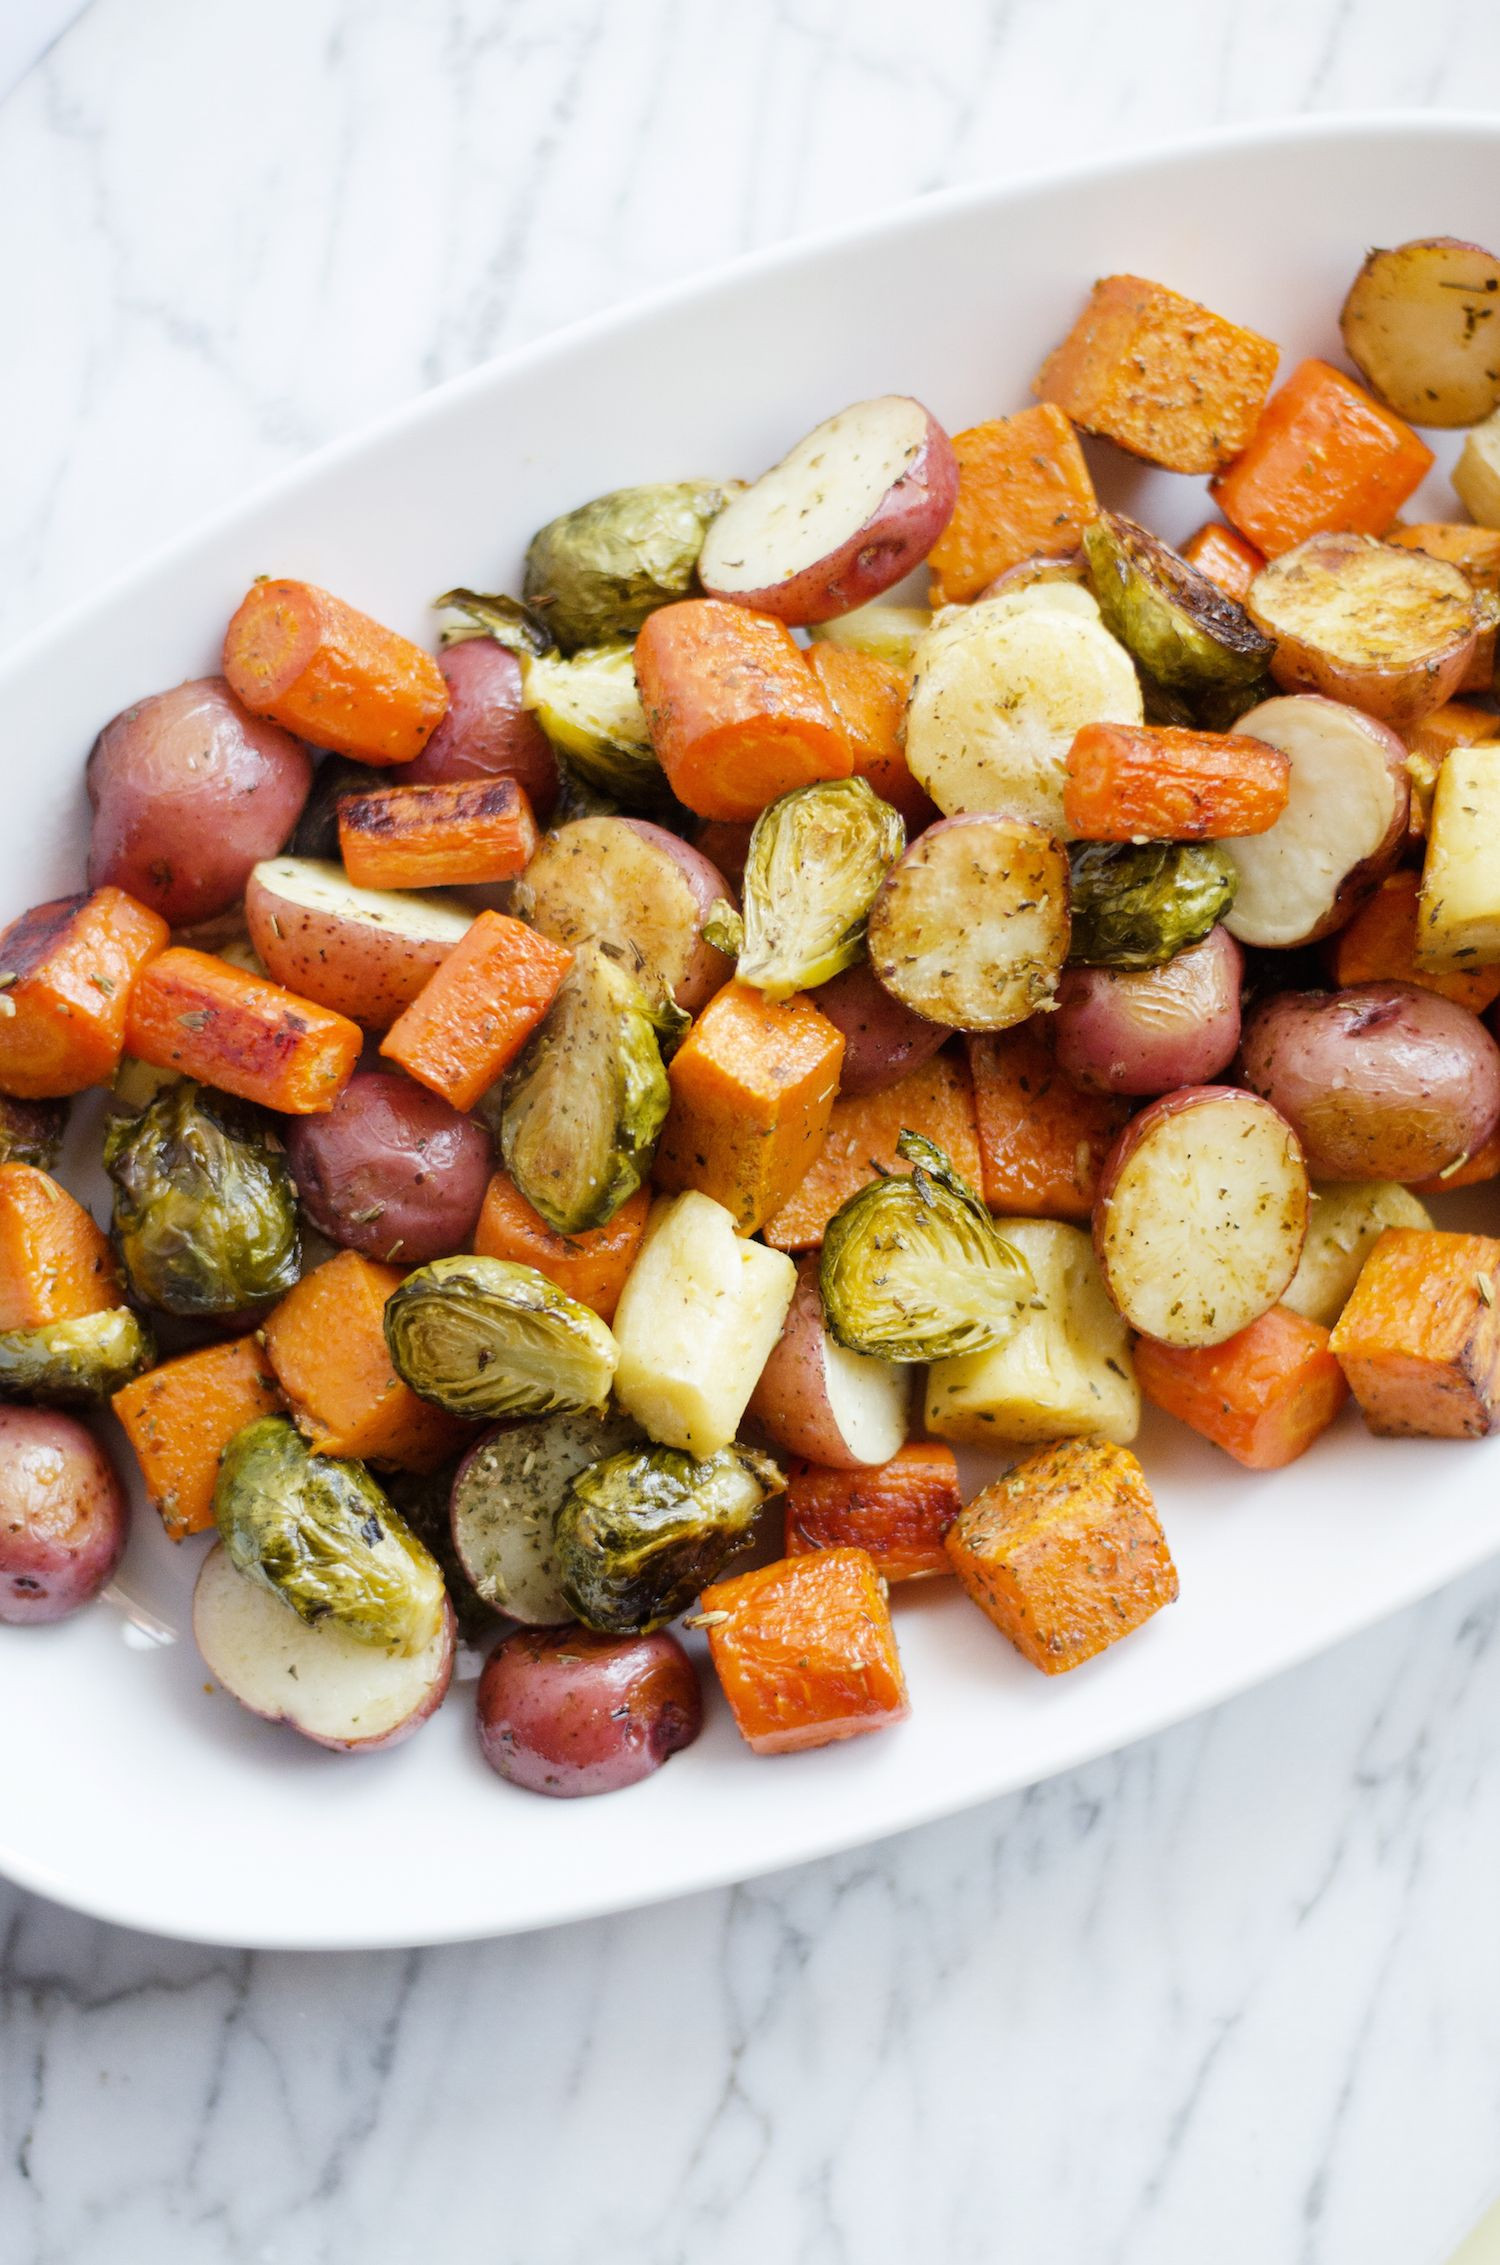 Giada Roasted Vegetables
 Roasted Potatoes Carrots Parsnips and Brussels Sprouts